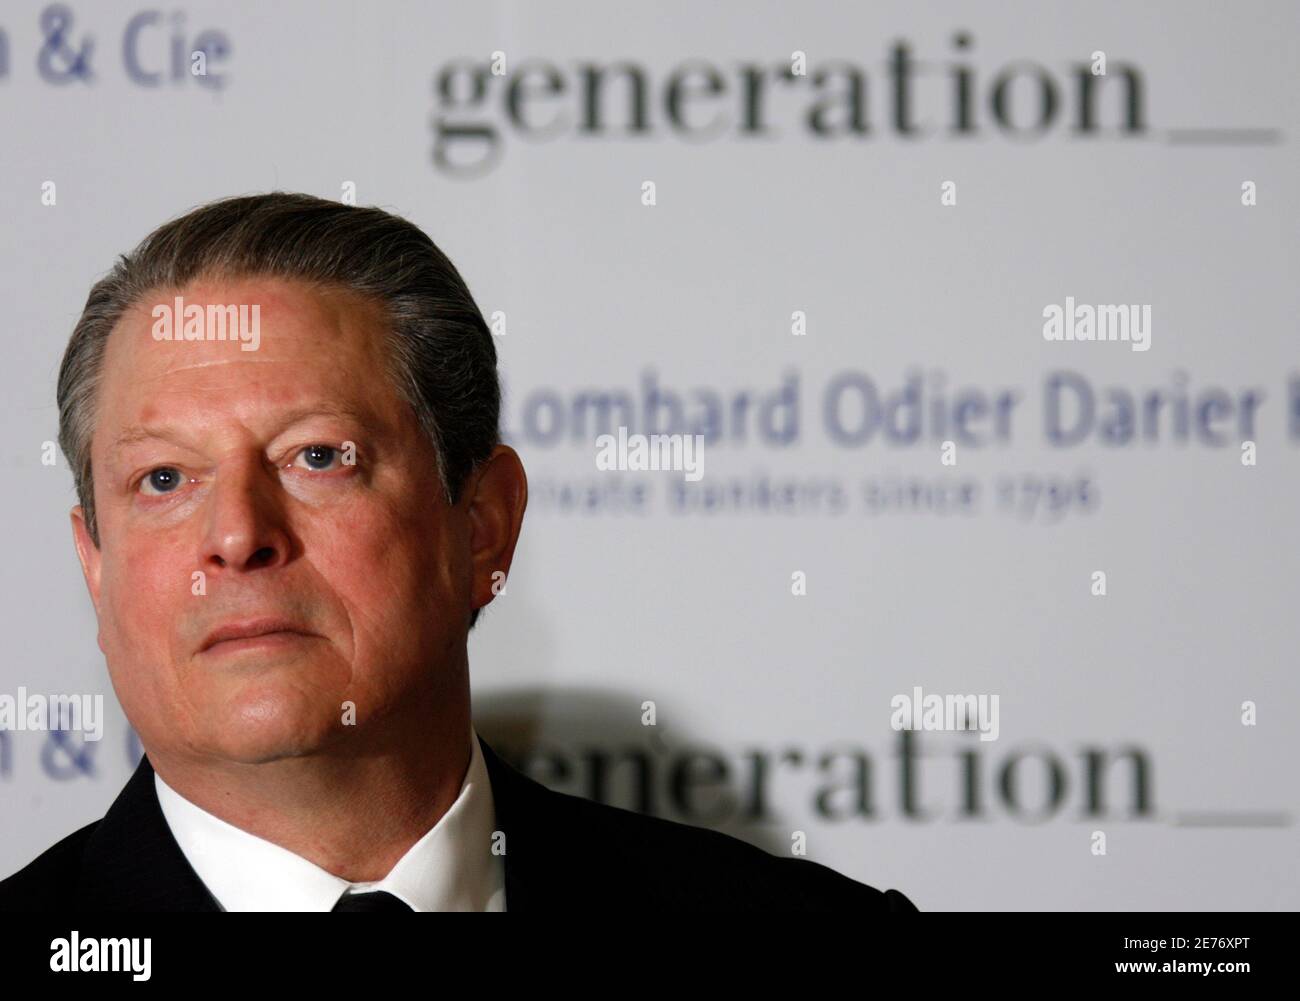 Al Gore, Nobel Peace Prize winner and Chairman of Generation Investment Management attends a news conference with Lombard Odier Darier Hentsch (LODH) Private Bank at Cointrin airport in Geneva March 11, 2008. LODH and Generation Investment Management have decided to join forces to promote sustainable investment. REUTERS/Denis Balibouse   (SWITZERLAND) Stock Photo